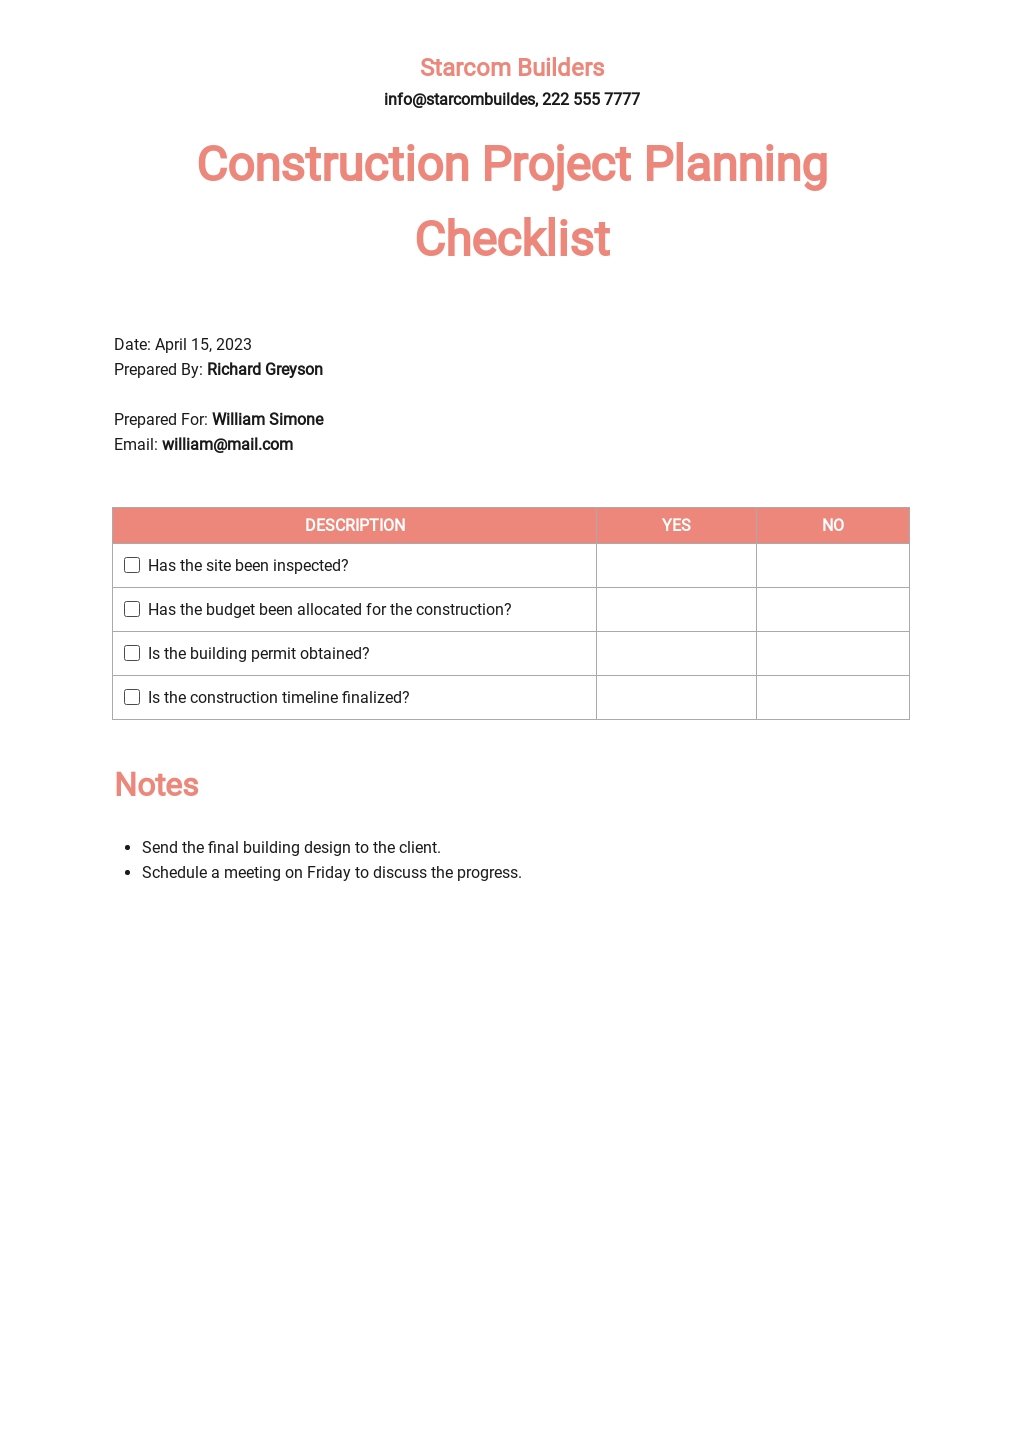 Construction Project Planning Checklist Template.jpe